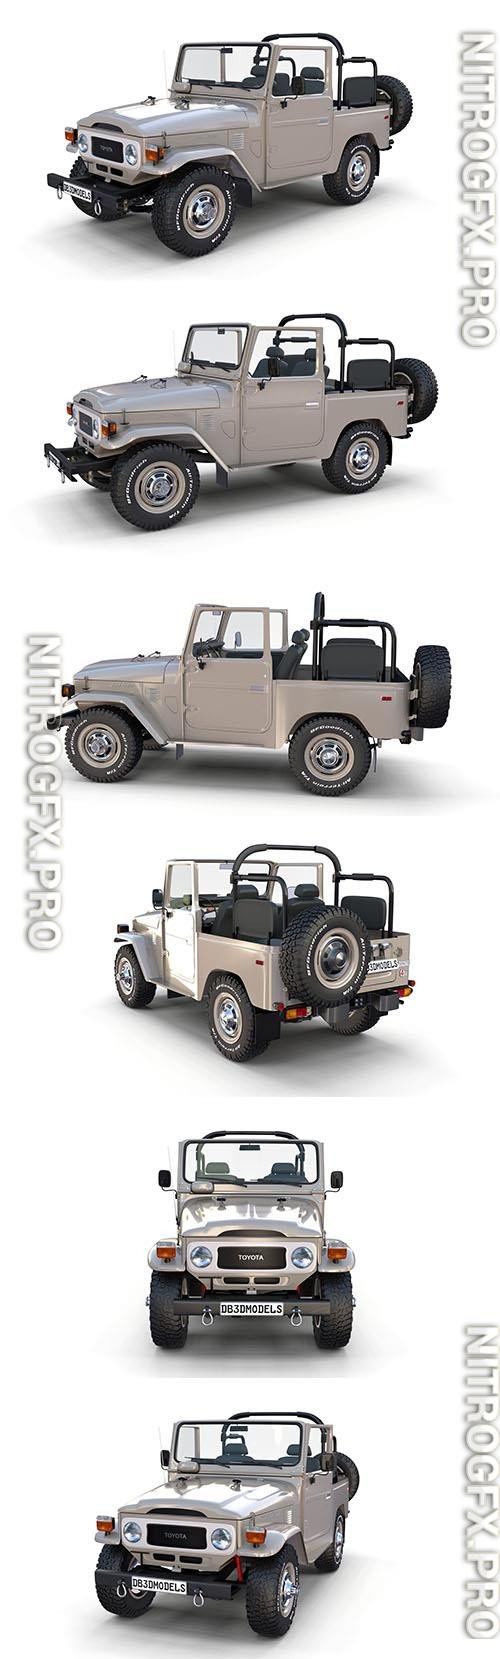 Toyota Land Cruiser FJ 40 Top Down with Interior 3D Models